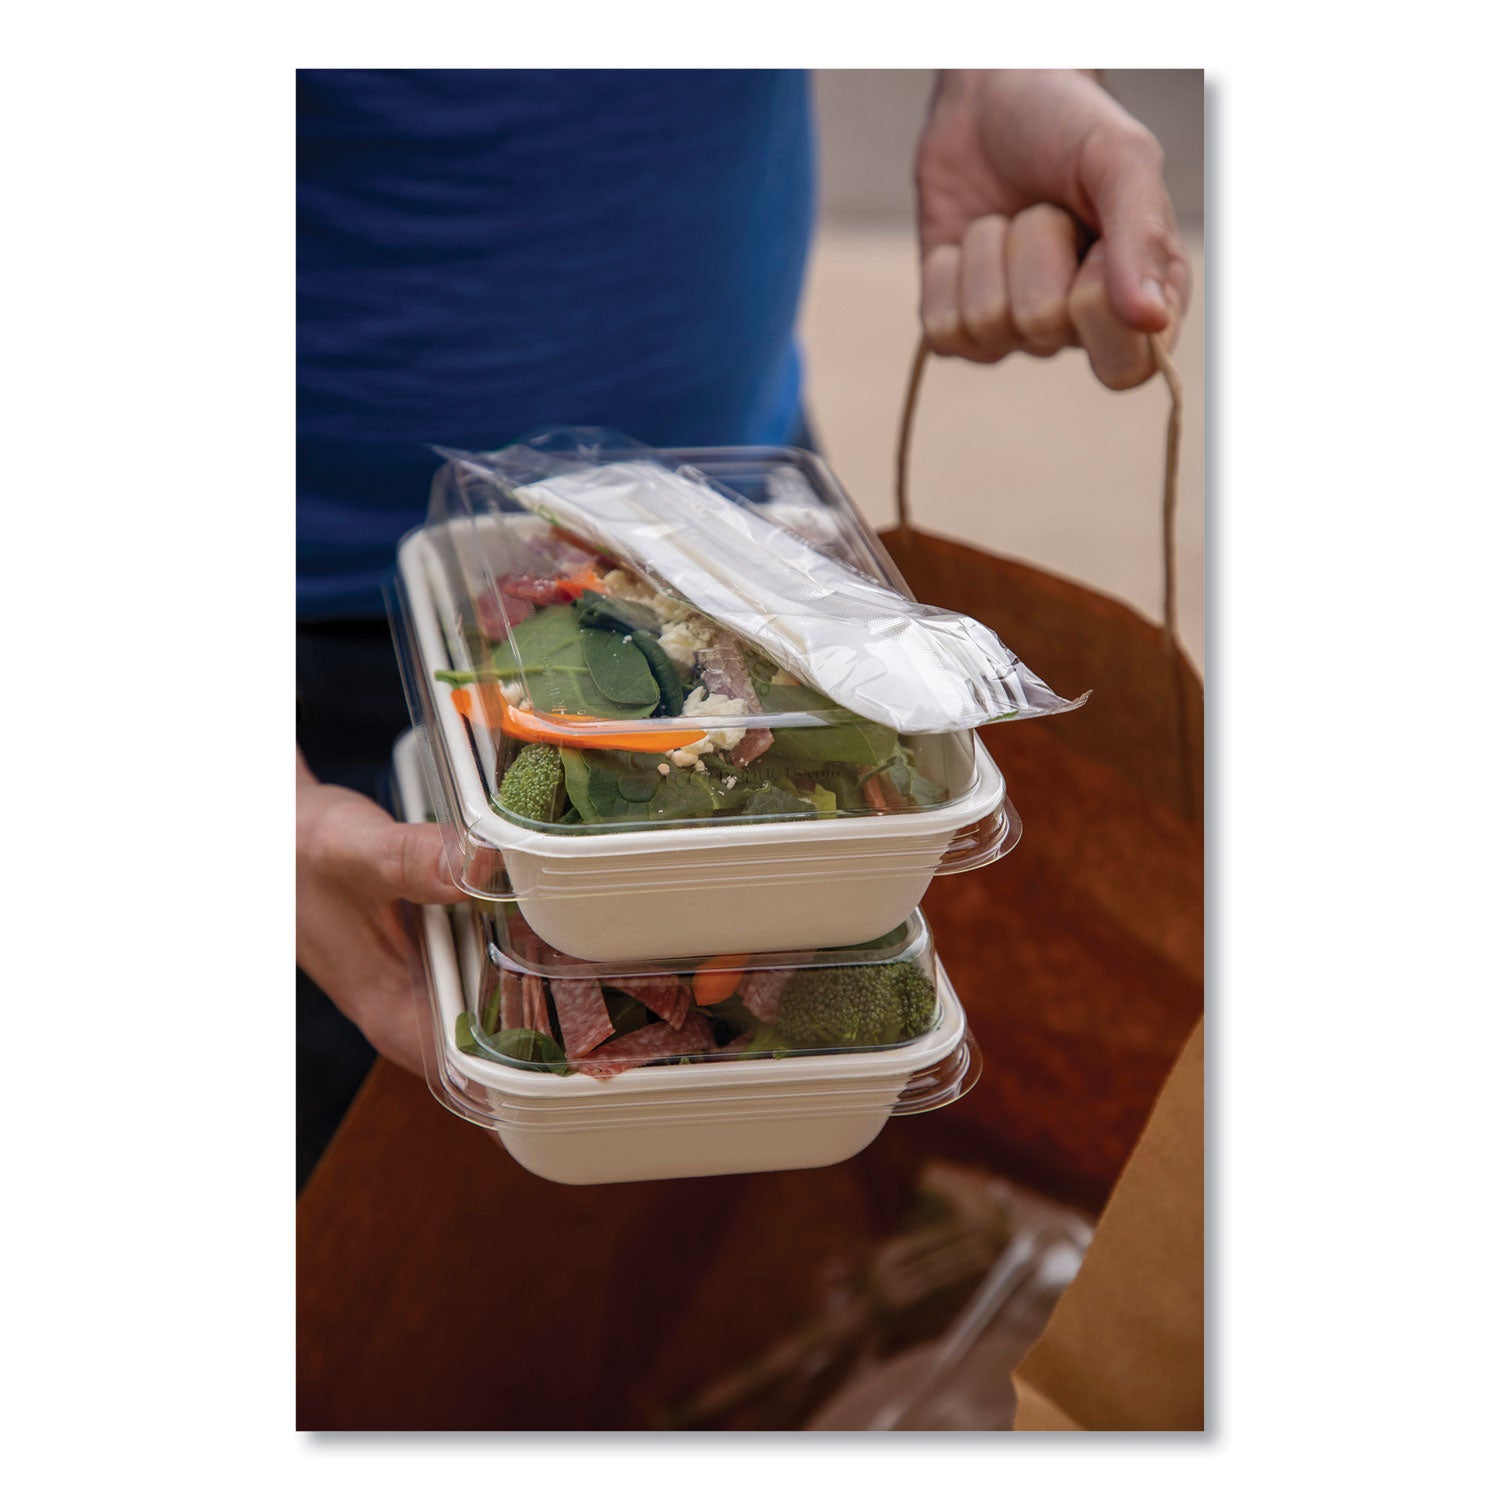 worldview-100%-recycled-content-lid-75-x-5-x-16-clear-plastic-400-carton_ecoepscrc16lid - 4